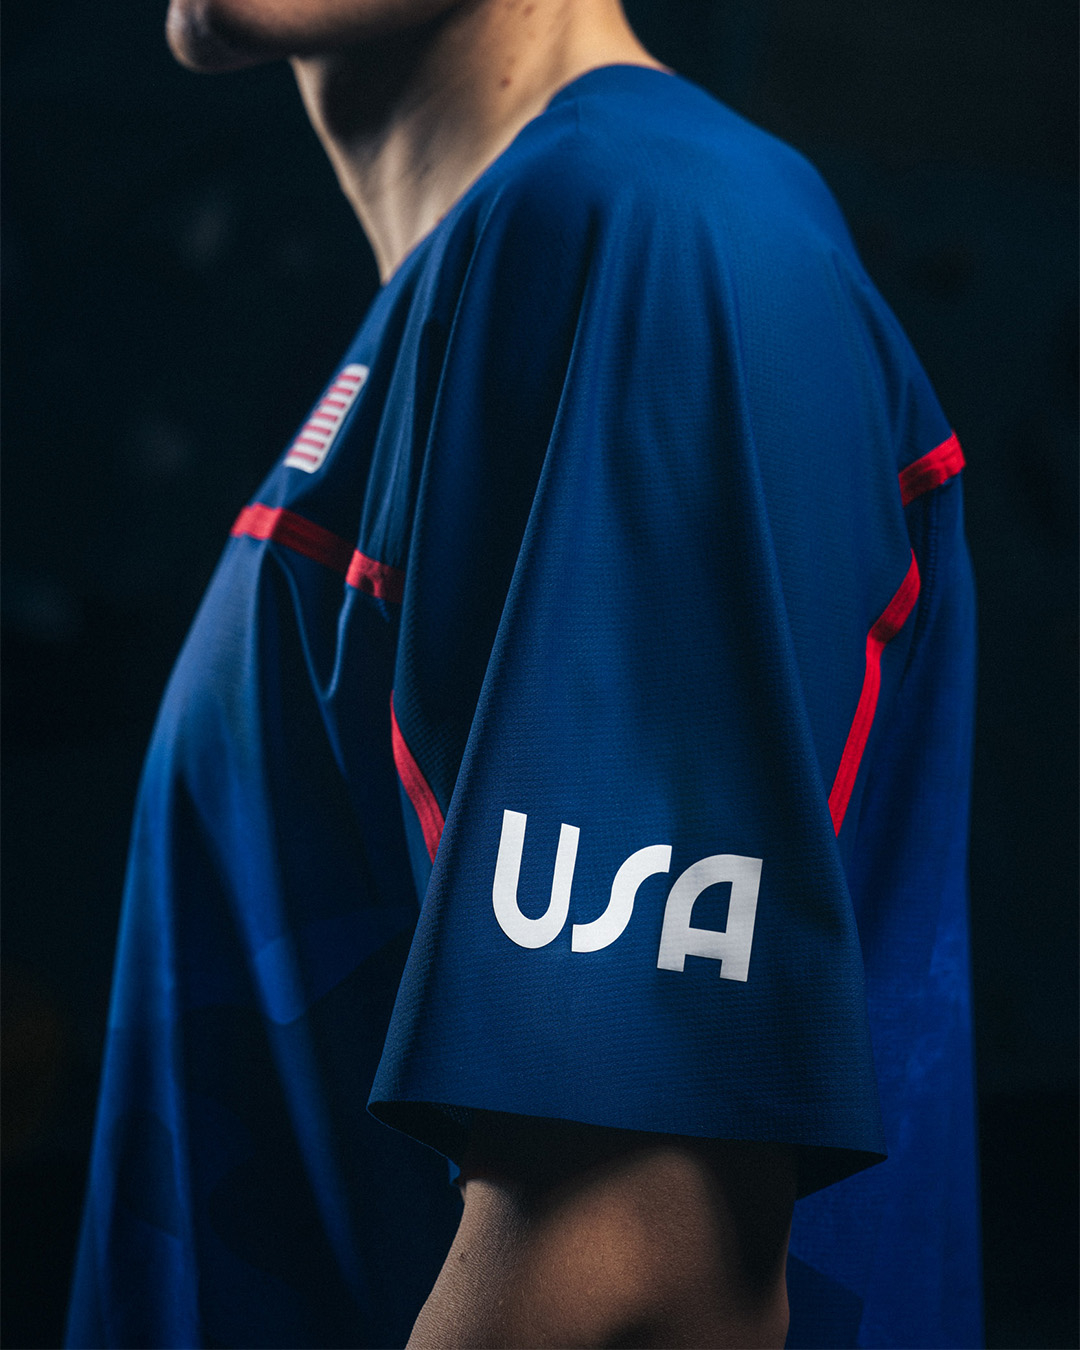 Athlete in Team USA uniform with &quot;USA&quot; logo on the sleeve